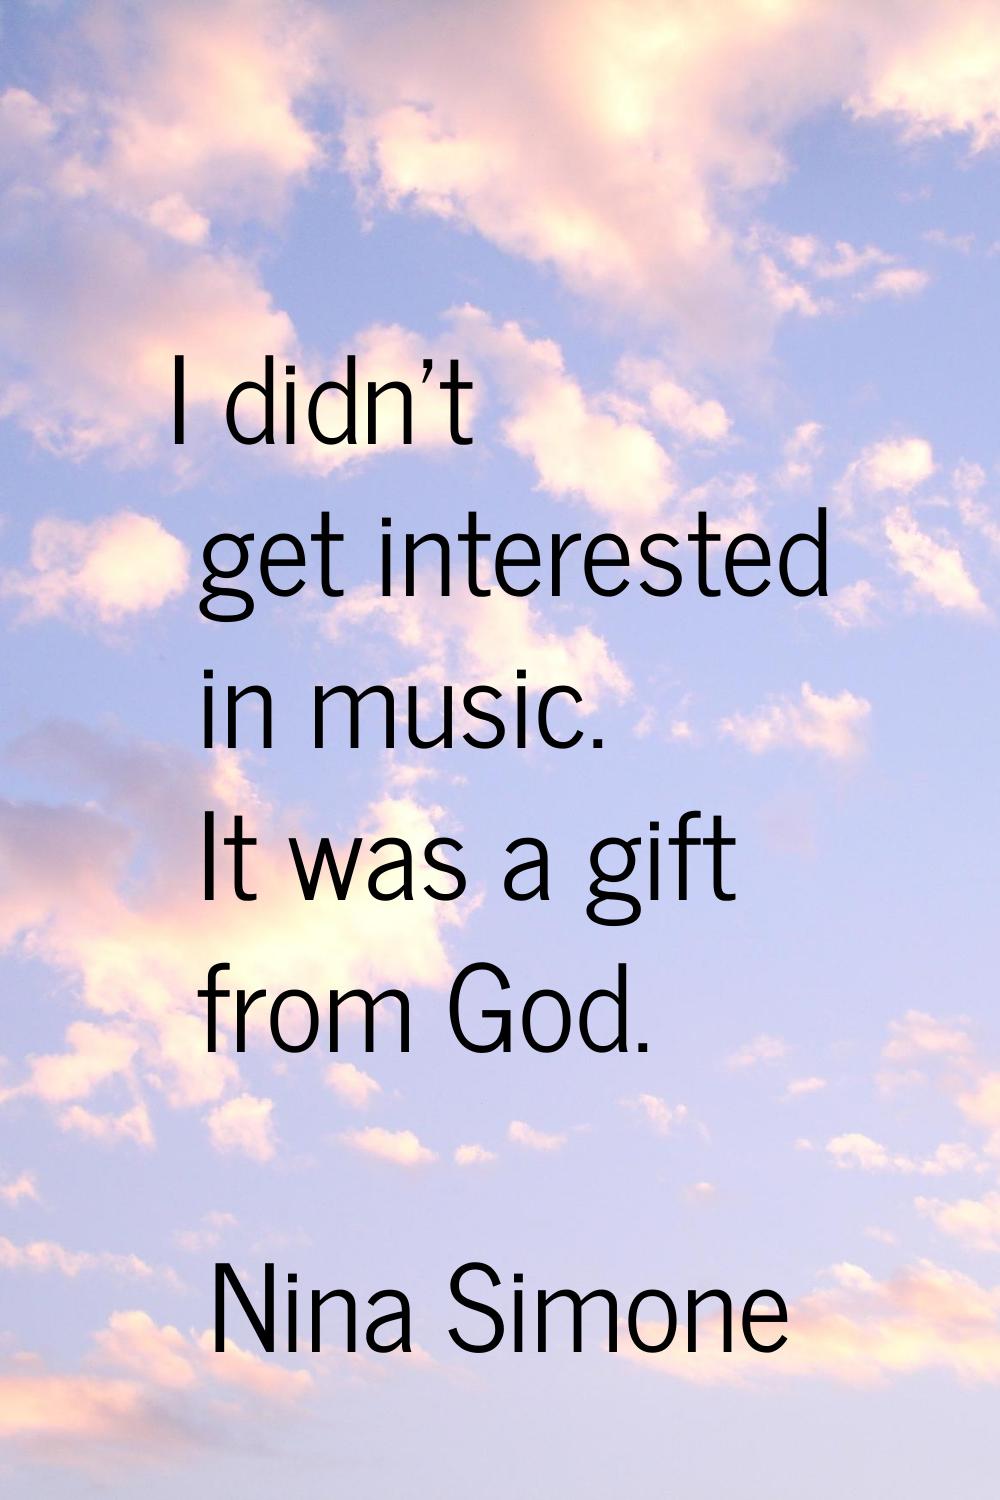 I didn't get interested in music. It was a gift from God.